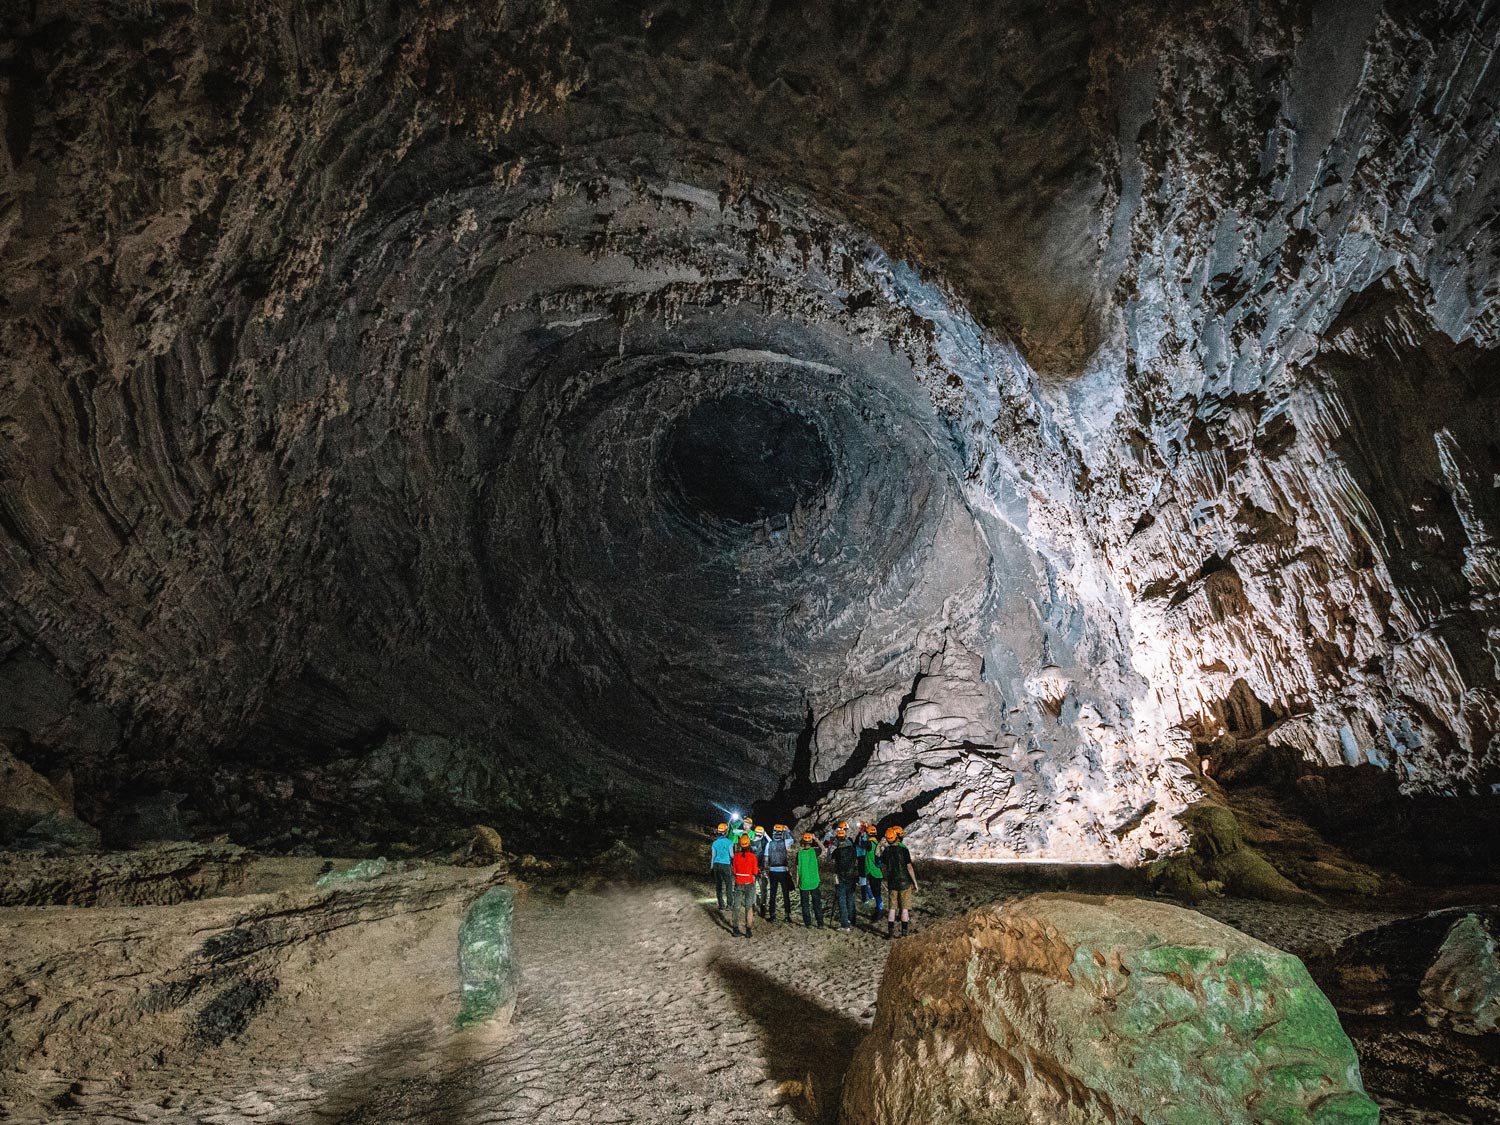 Visitors can explore Hang Tien, the largest dry cave in the region, which has an amazing and peculiar circular dome structure inside.